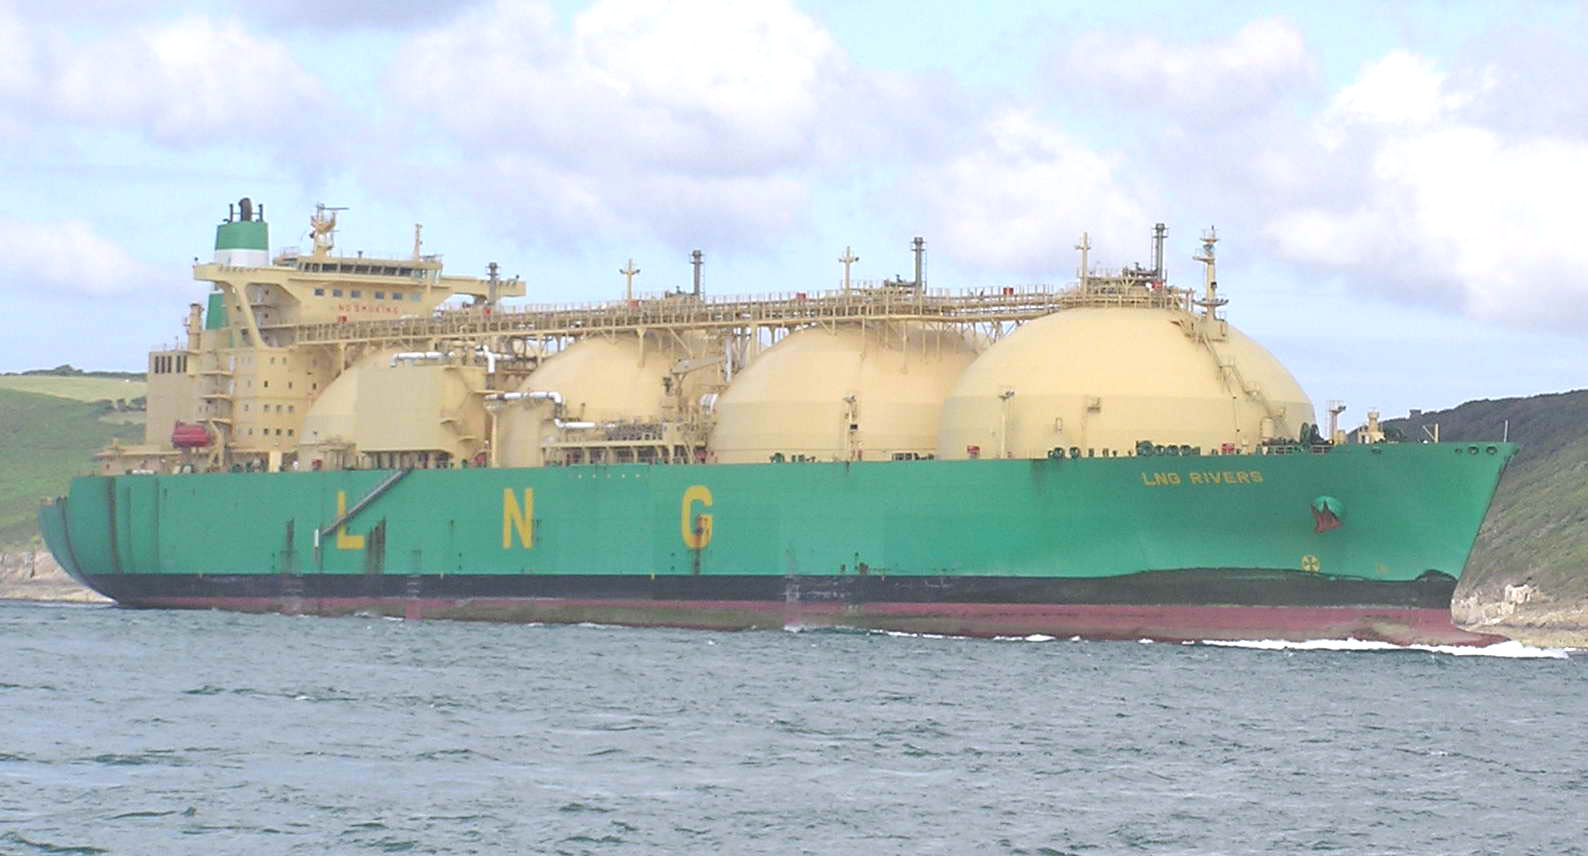 Making sense of DOEs insensible proposals to change LNG export decision-making procedures